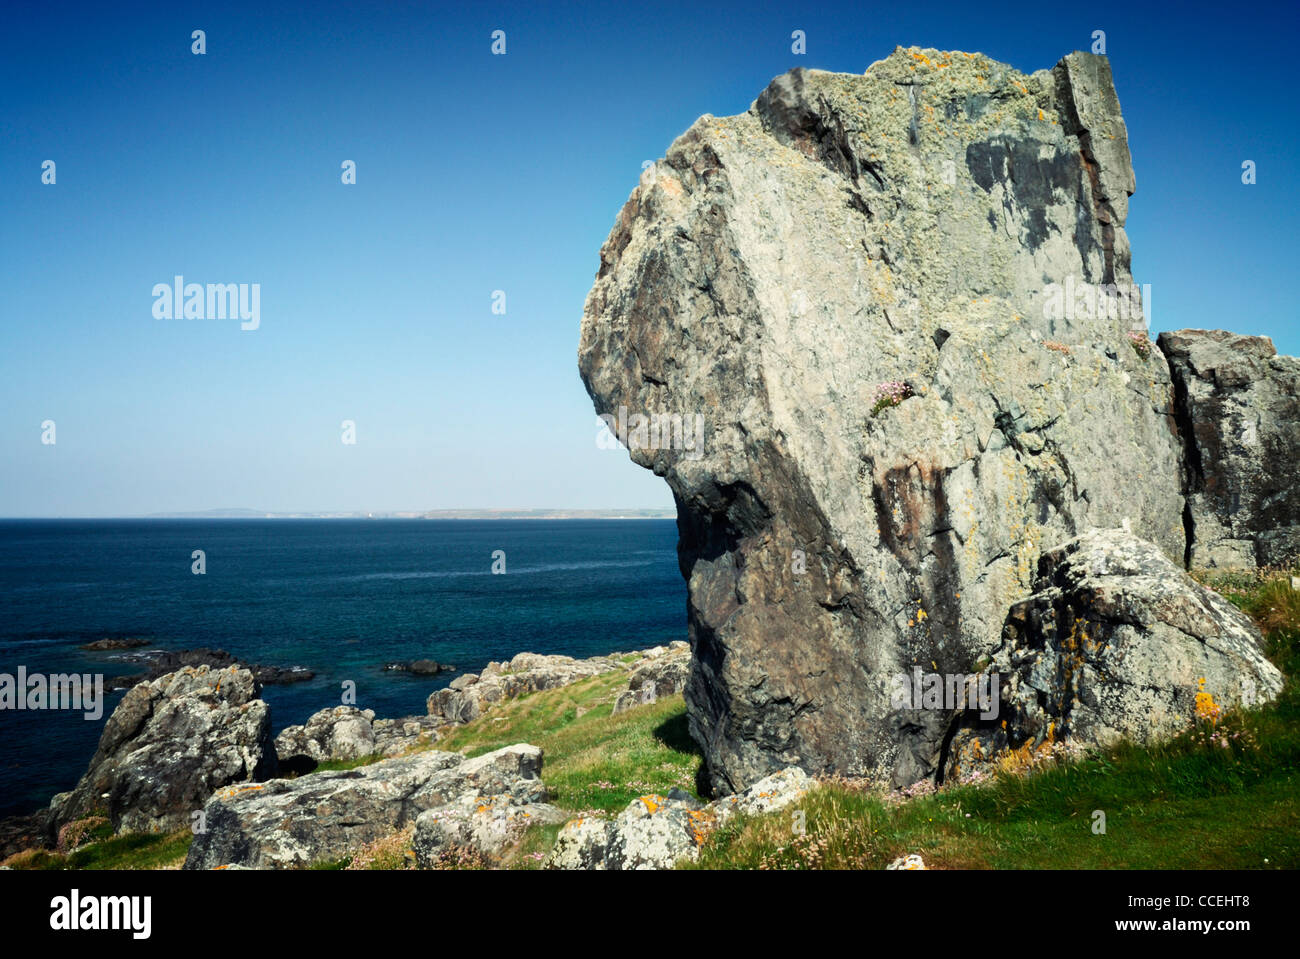 Craggy coastline on the south west coastal walking trail just south of st ives, cornwall,england,uk Stock Photo